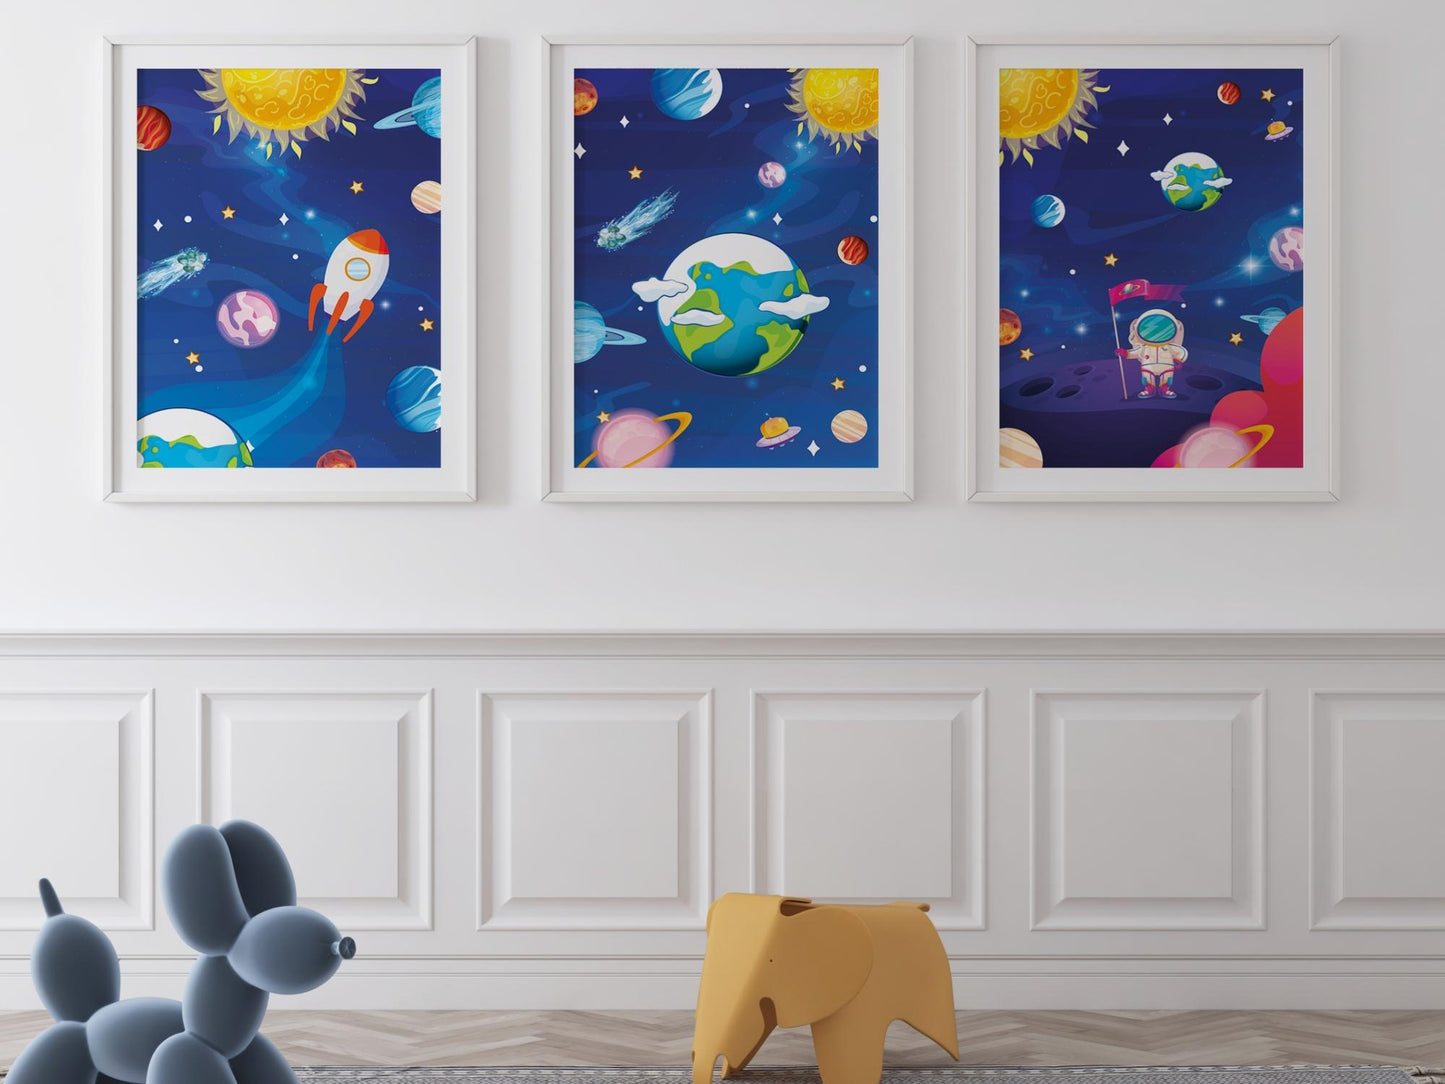 Space 3 posters for children's room - Boy or girl decoration - Space posters - Astronaut Cosmonaut gift idea - A4 A3 quality printing